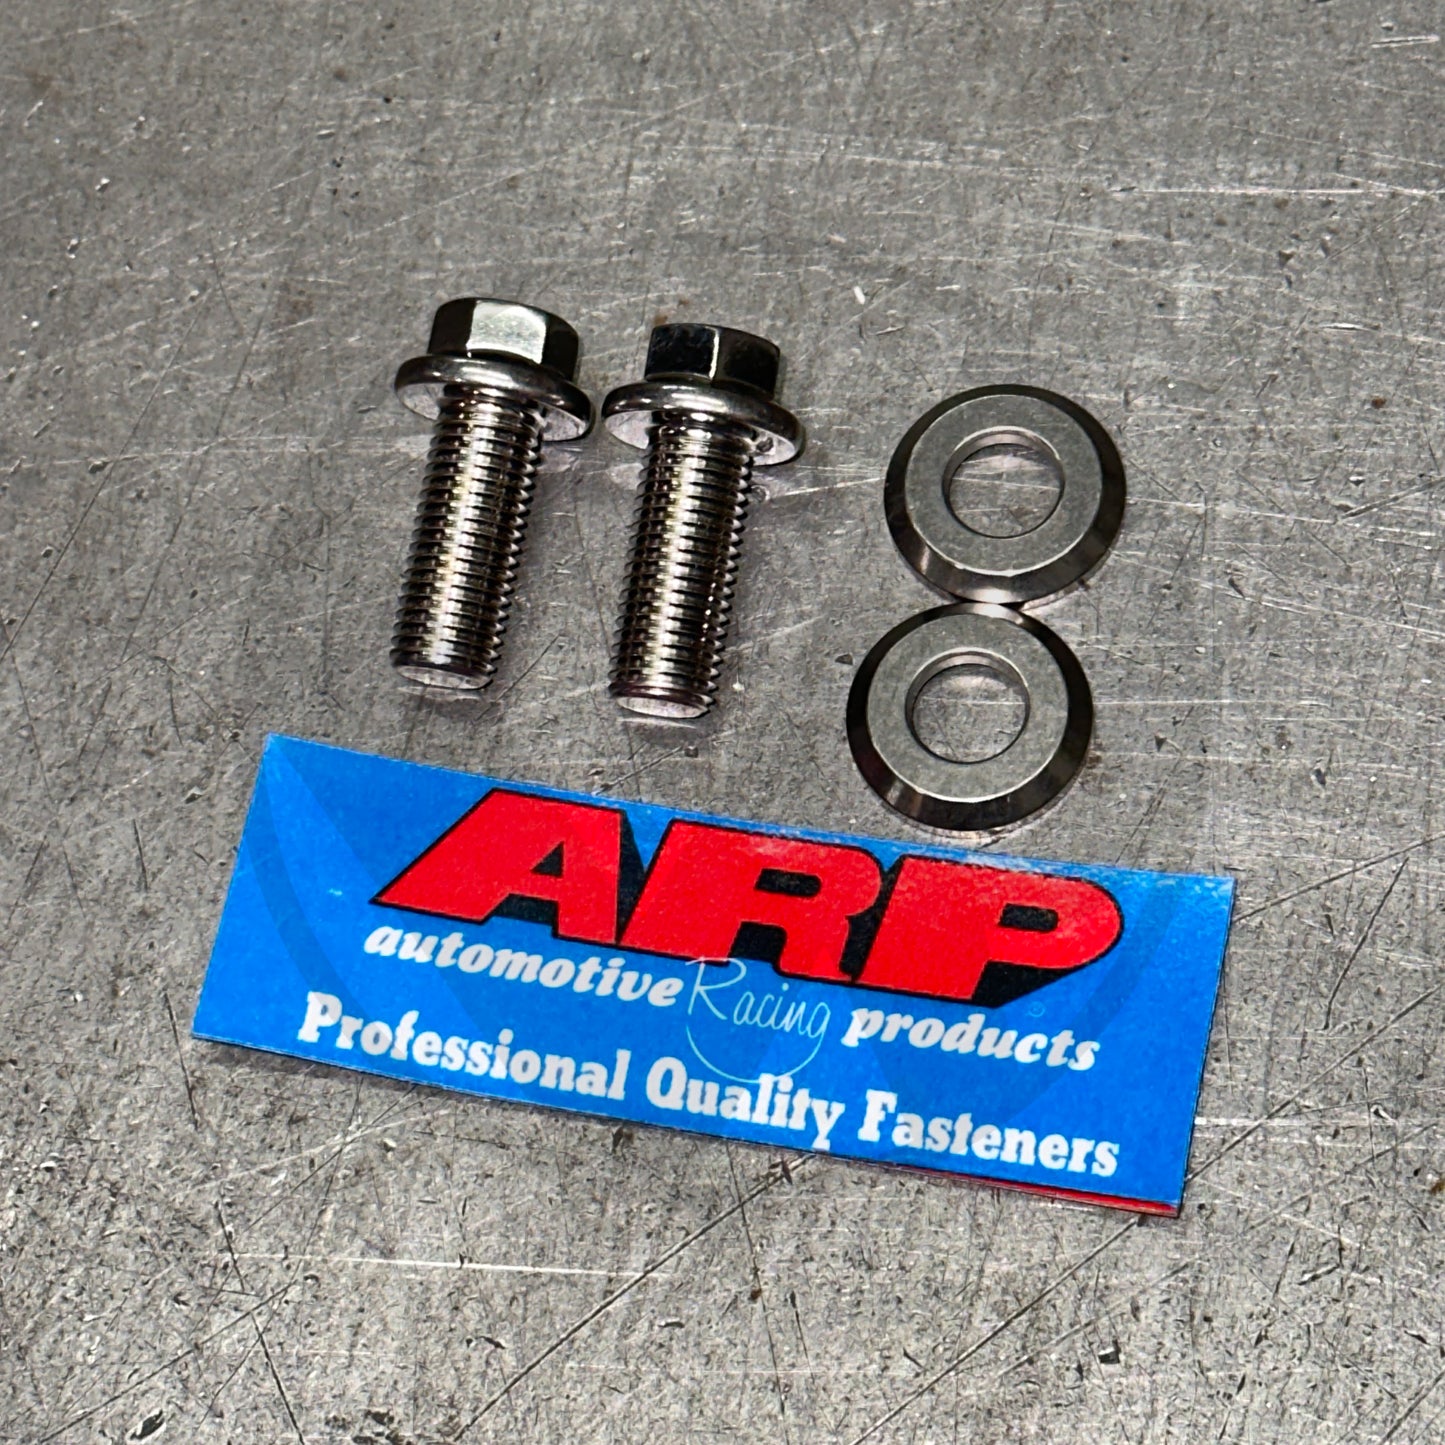 ARP Stainless Cam Gear Bolts and Washers Upgrade for Honda Acura B Series